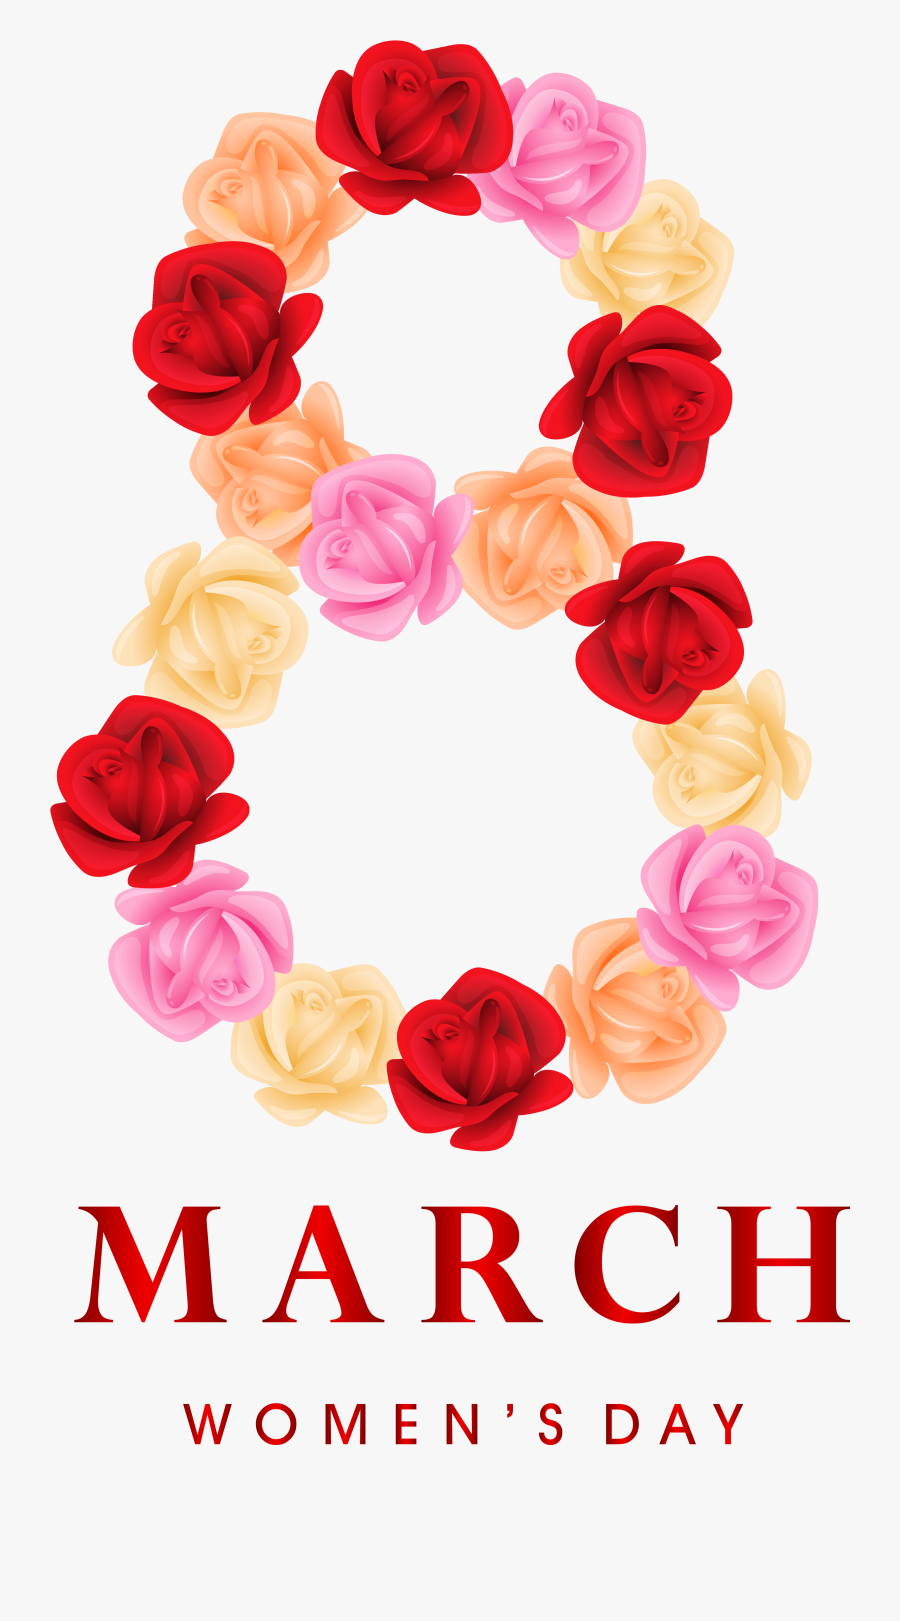 Happy Women's Day Png, Transparent Clipart